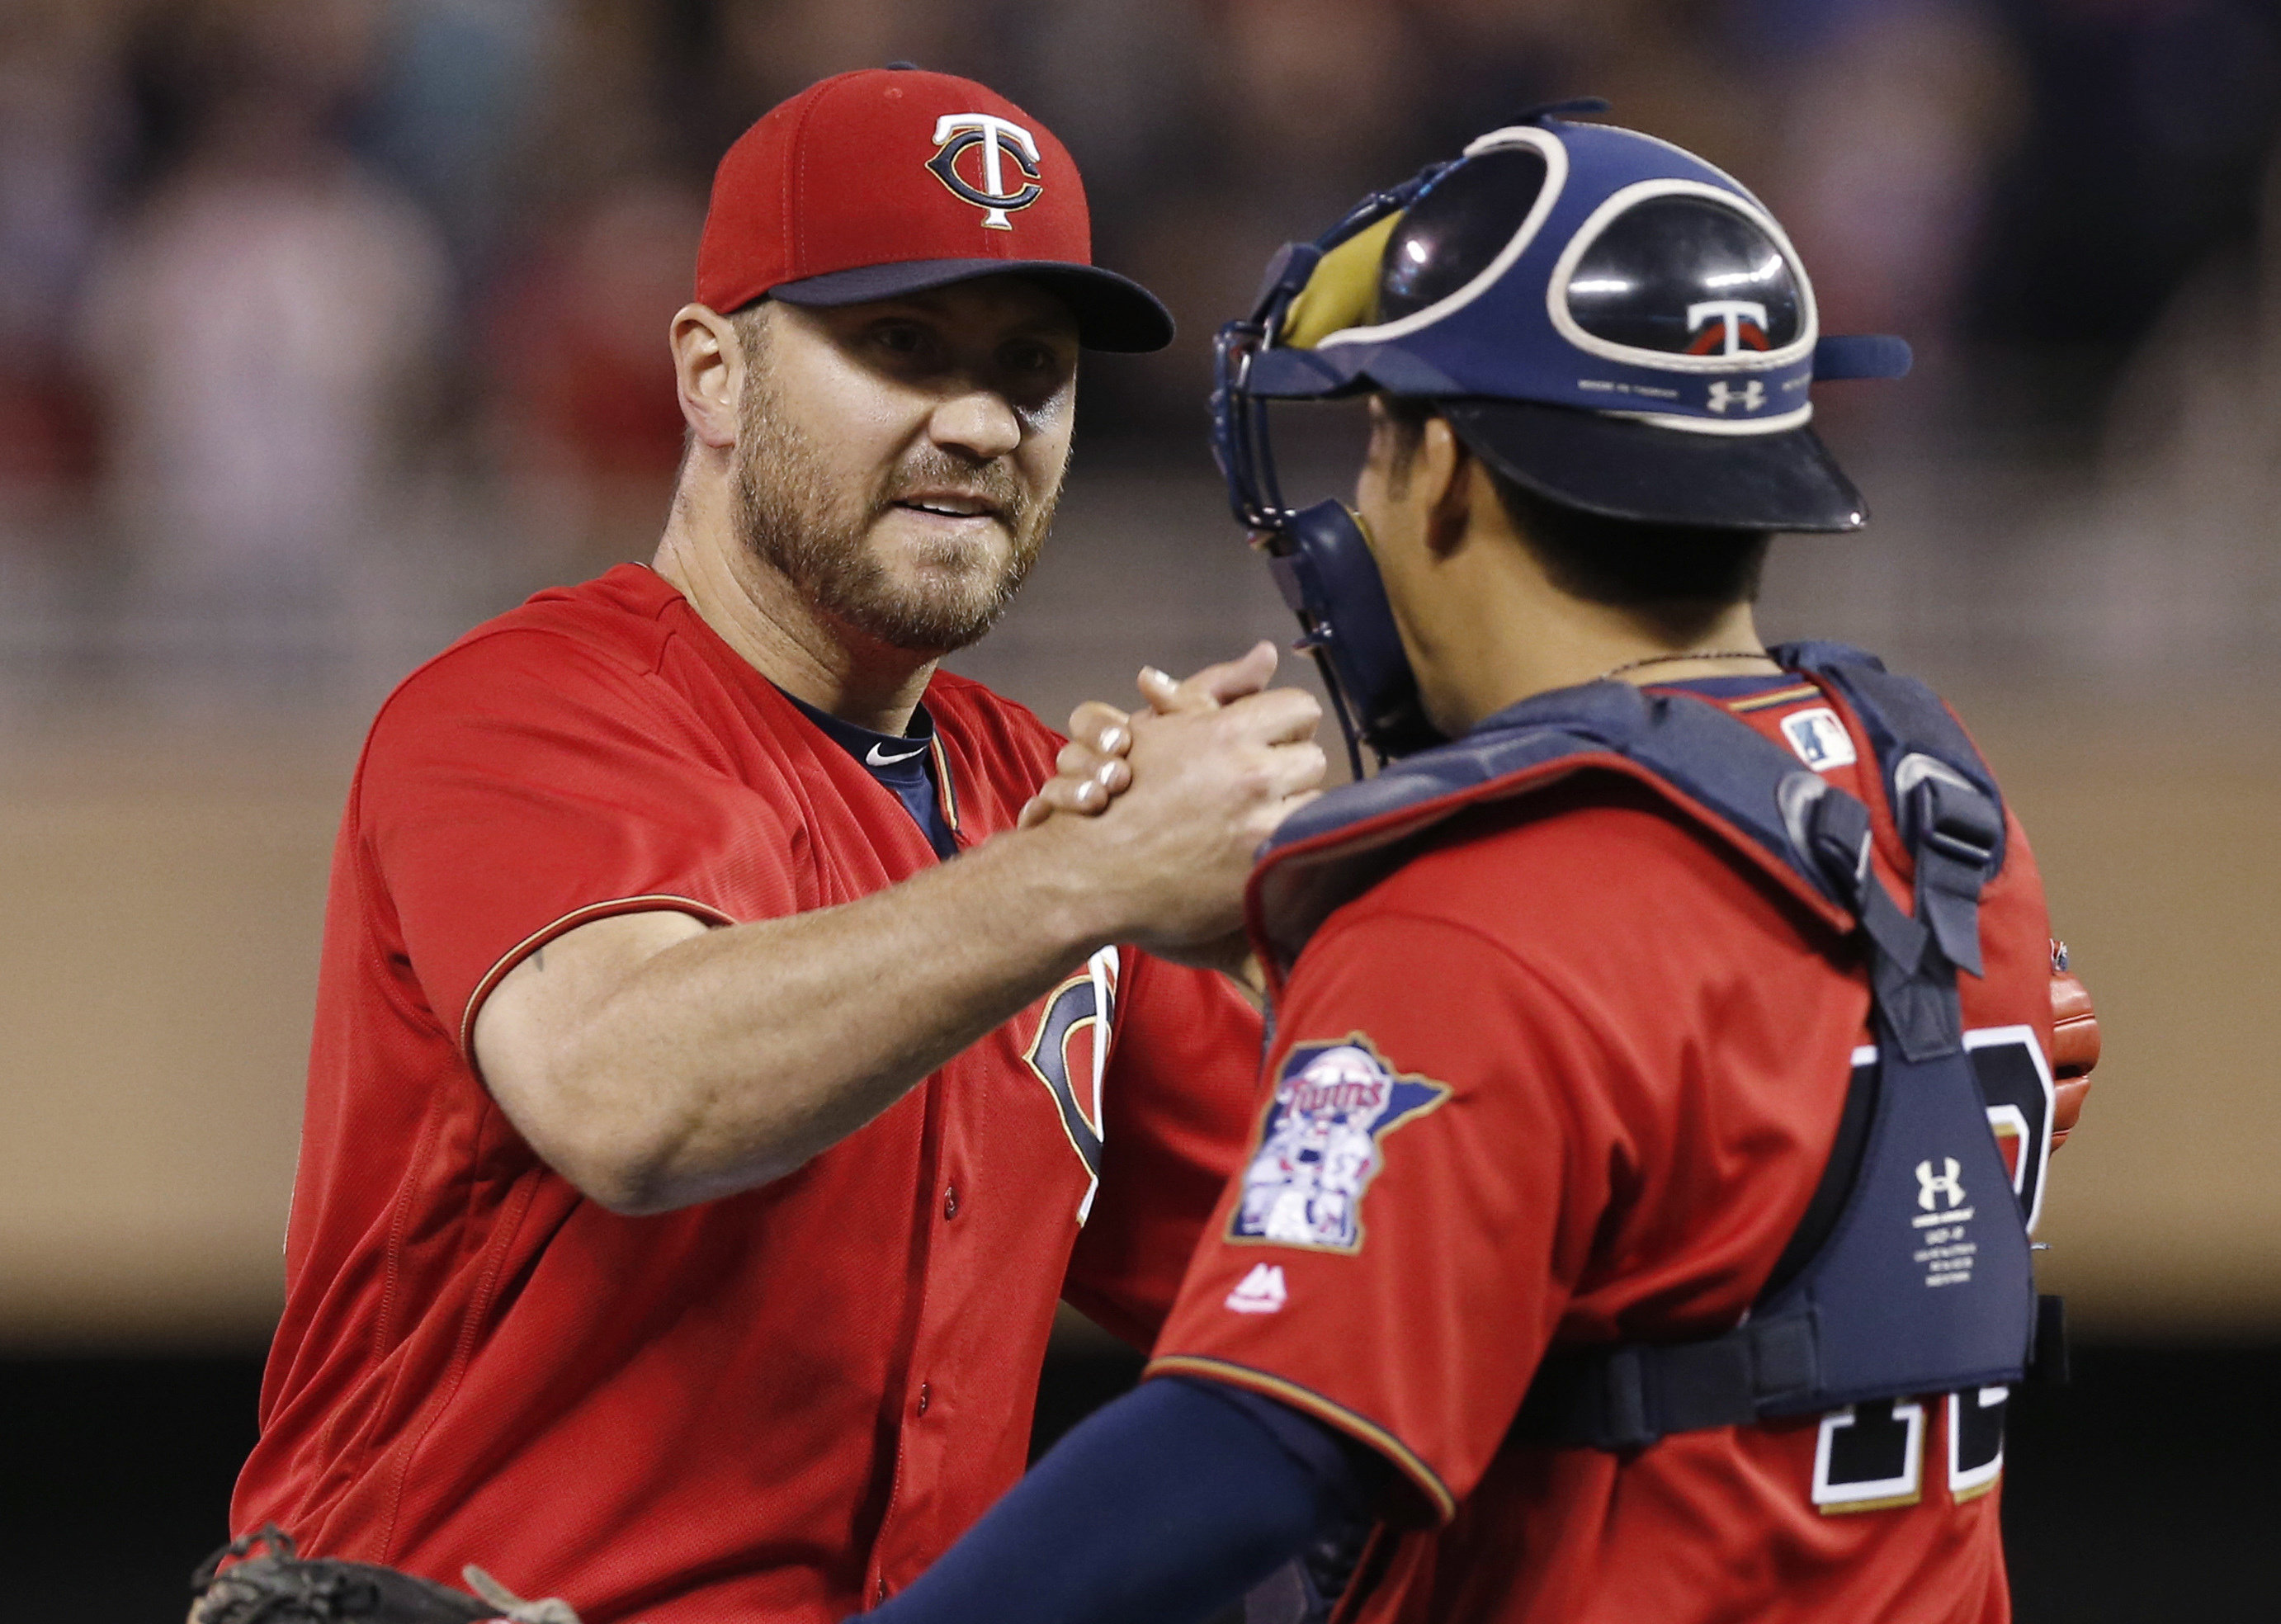 Twins come back in eighth inning for 5-4 victory over Angels